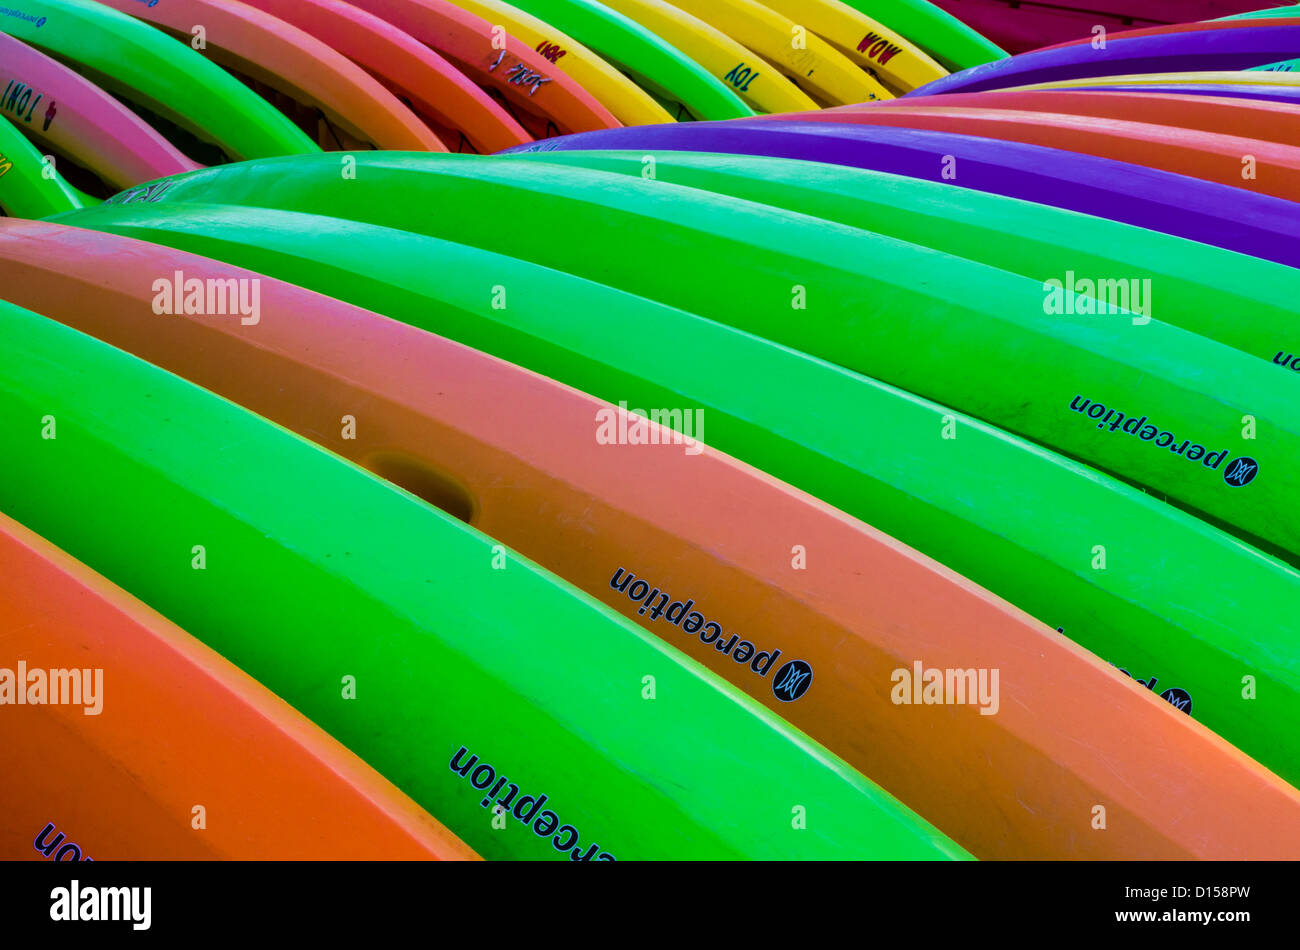 USA, Florida, Key Largo. Abstract of colorful kayaks and canoes overturned at John Pennekamp Coral Reef SP. Stock Photo